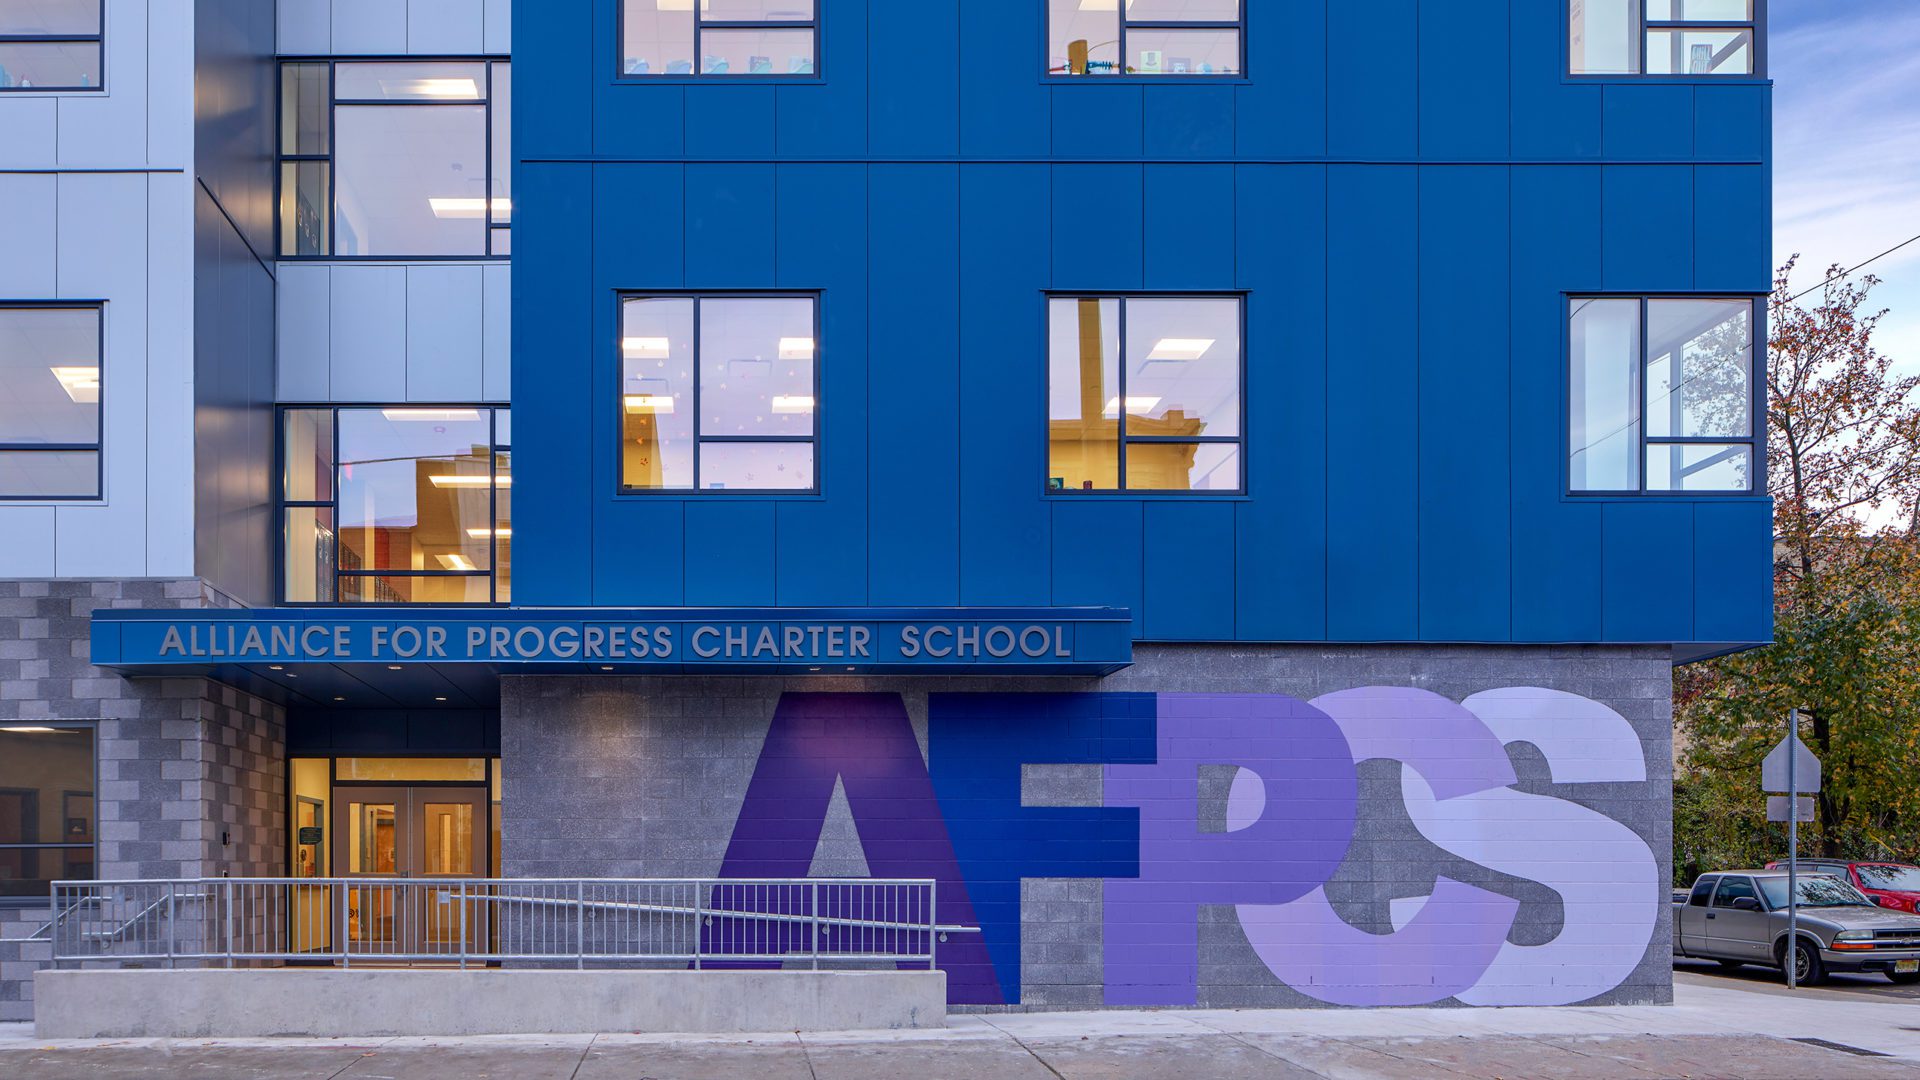 blue and grey school building. sign reads alliance for progress charter school